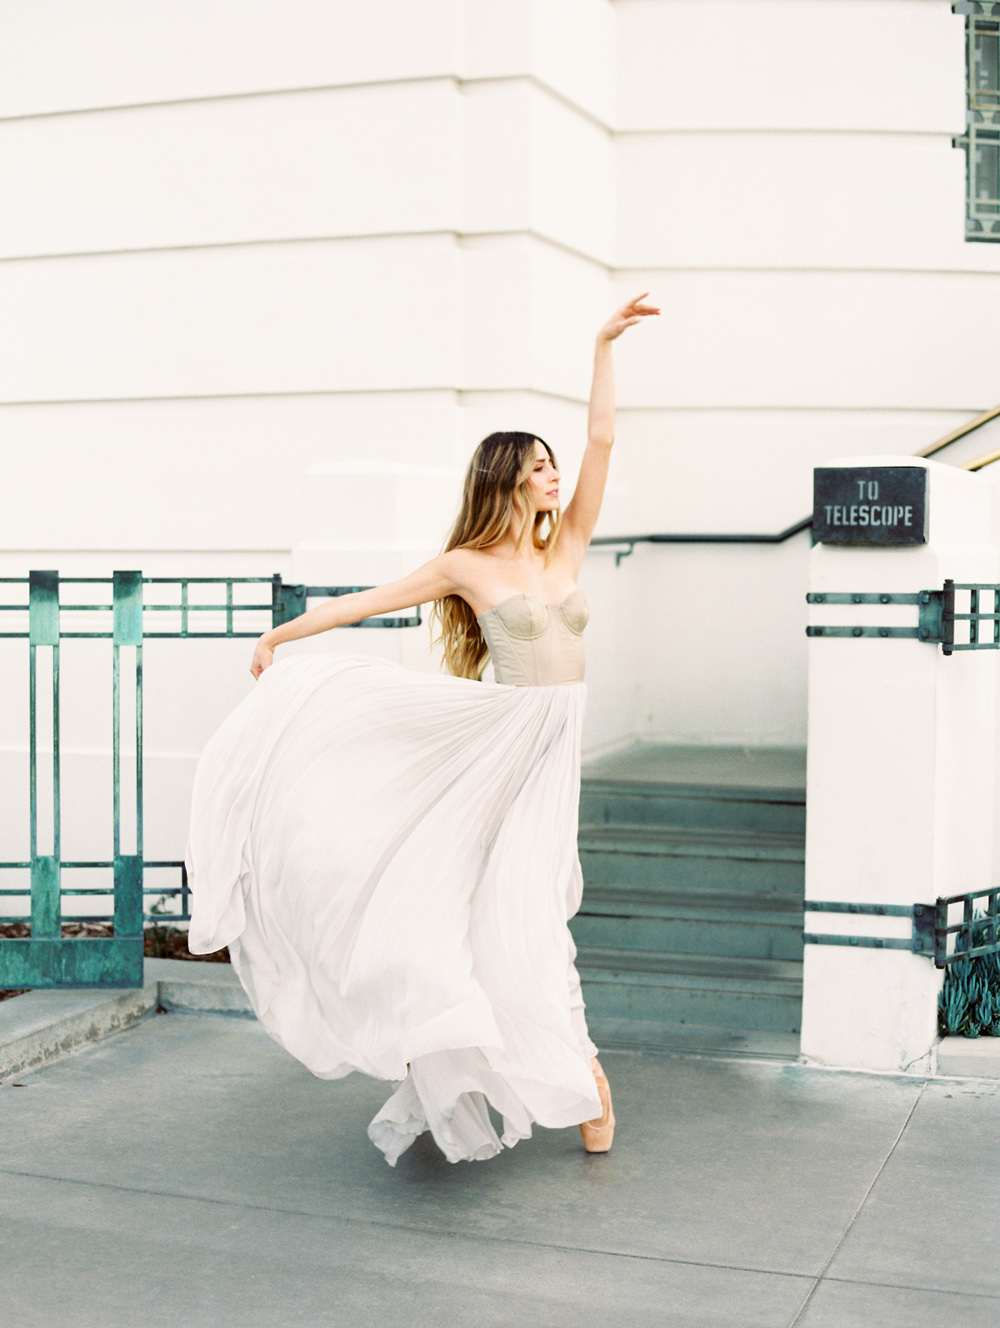 leanne marshall dress on dancer at Griffith Observatory stairs to telescope in LA photo by Mary Dougherty